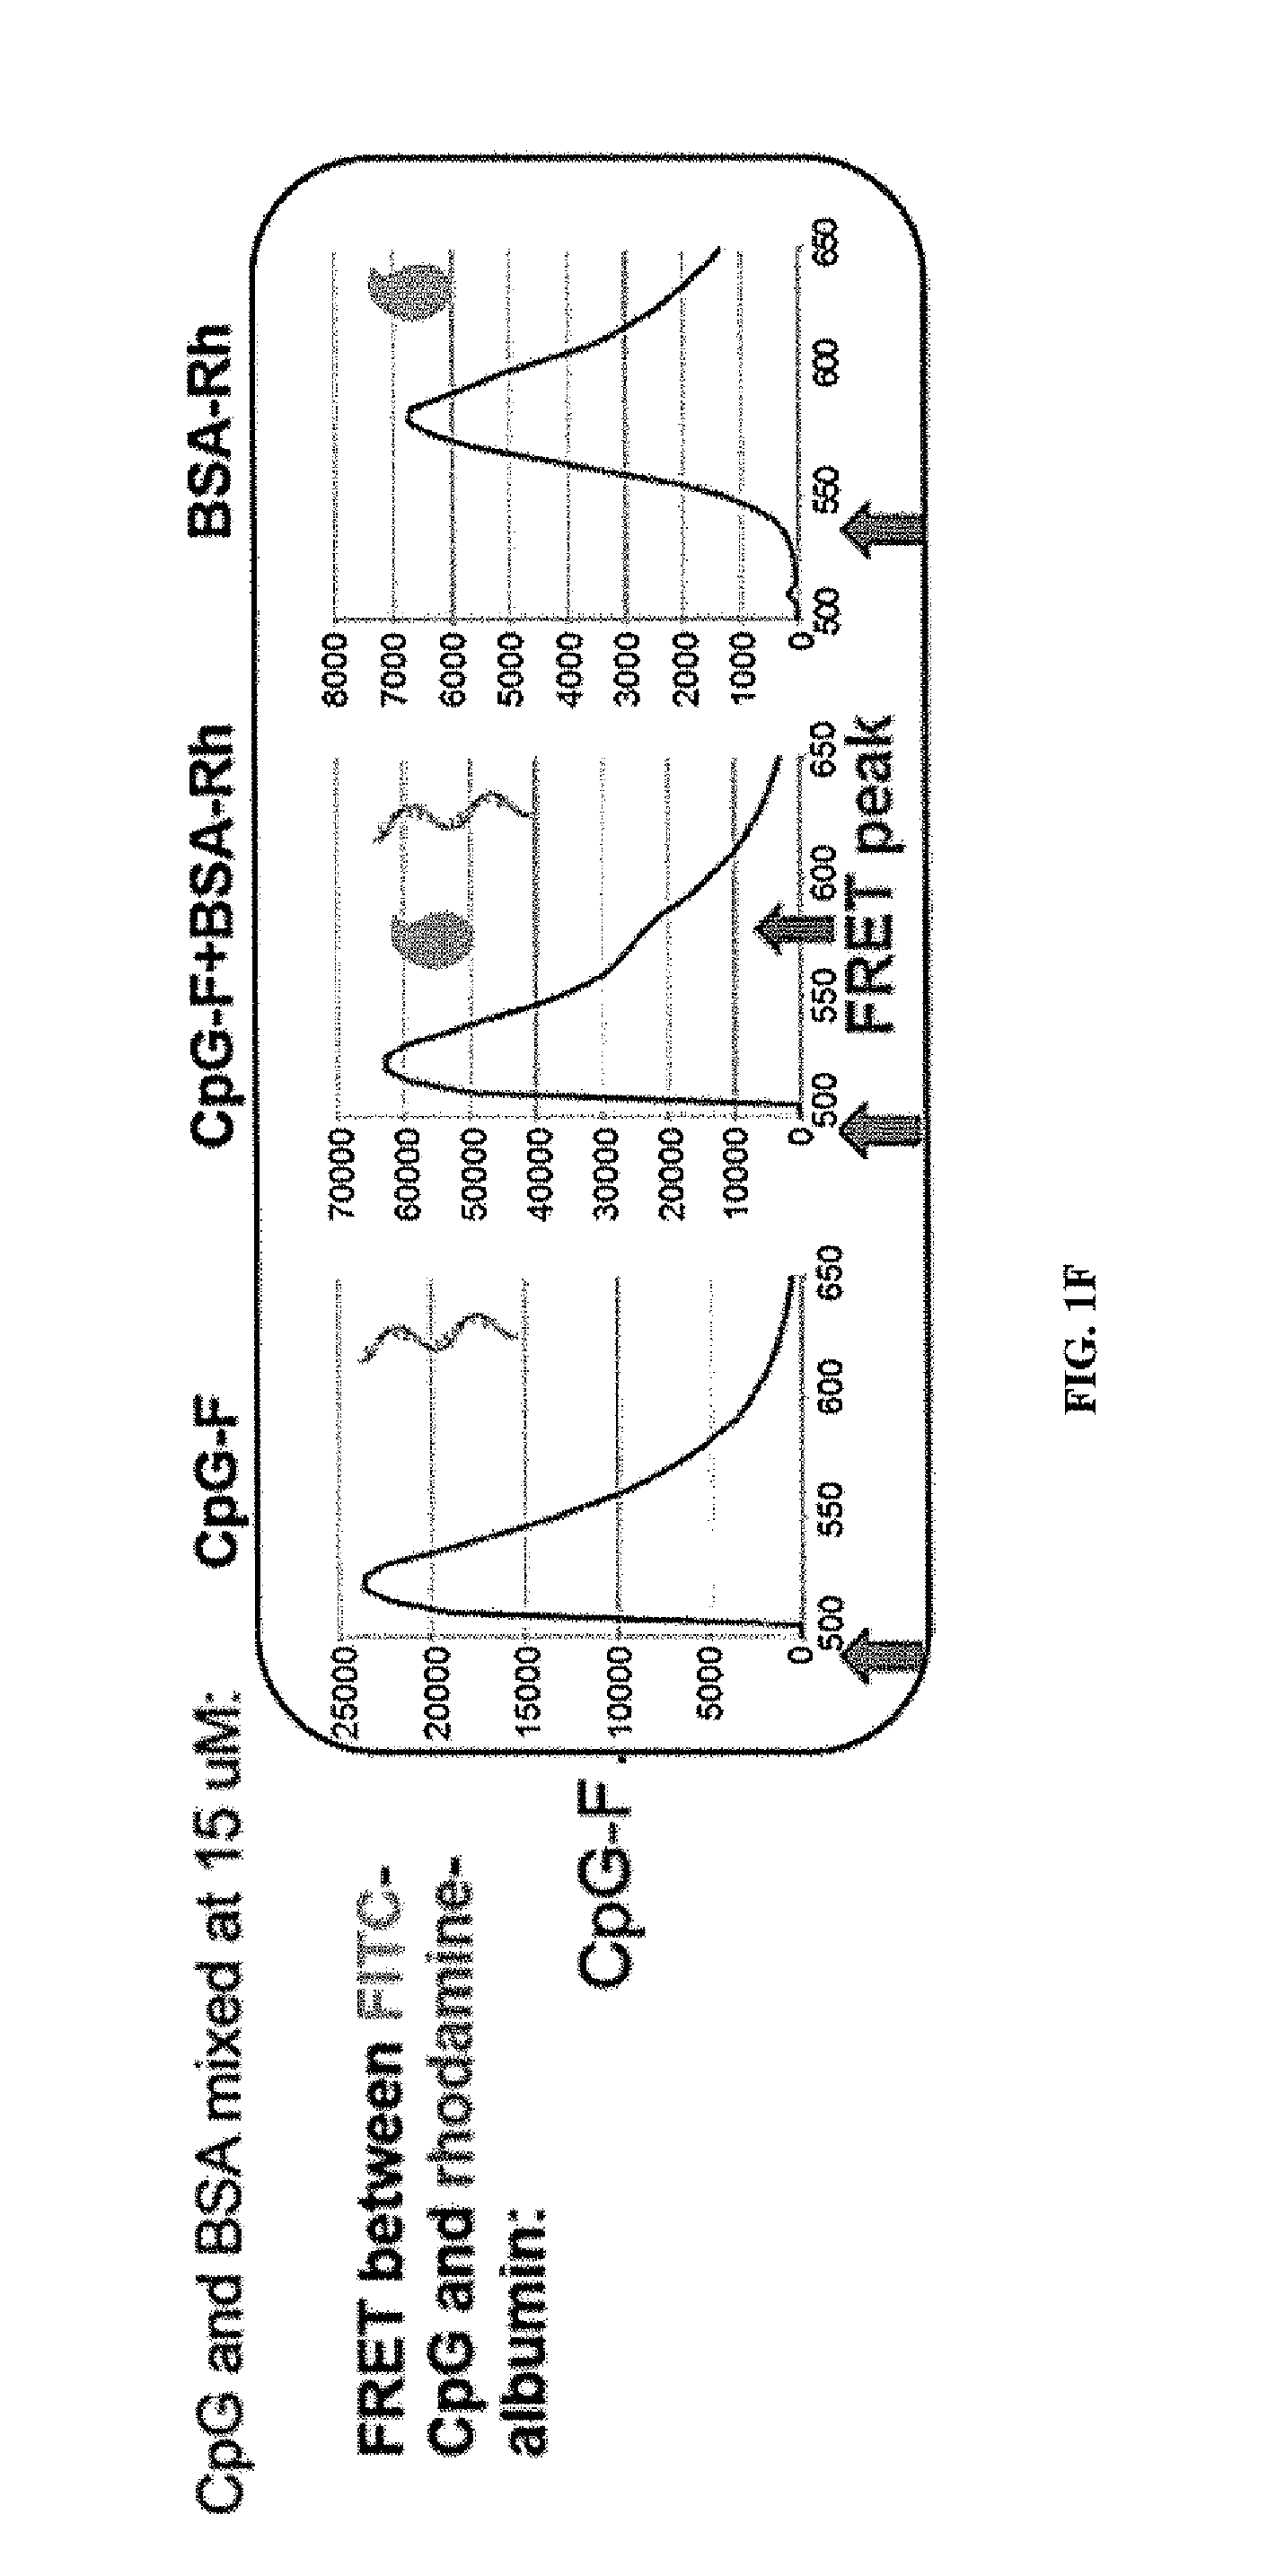 Immunostimulatory compositions and methods of use thereof